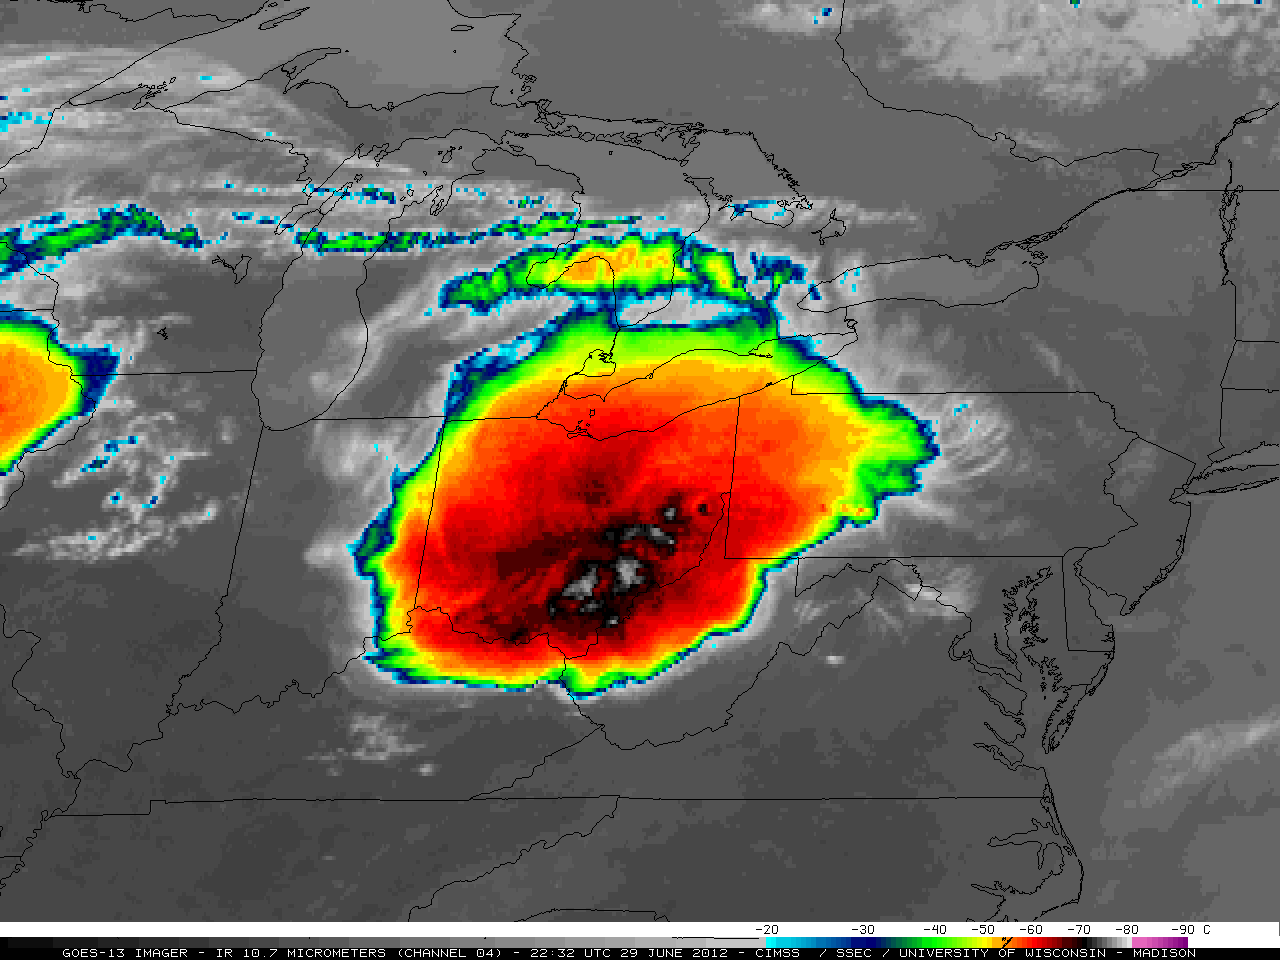 GOES-13 10.7 Âµm IR channel images (click image to play animation)